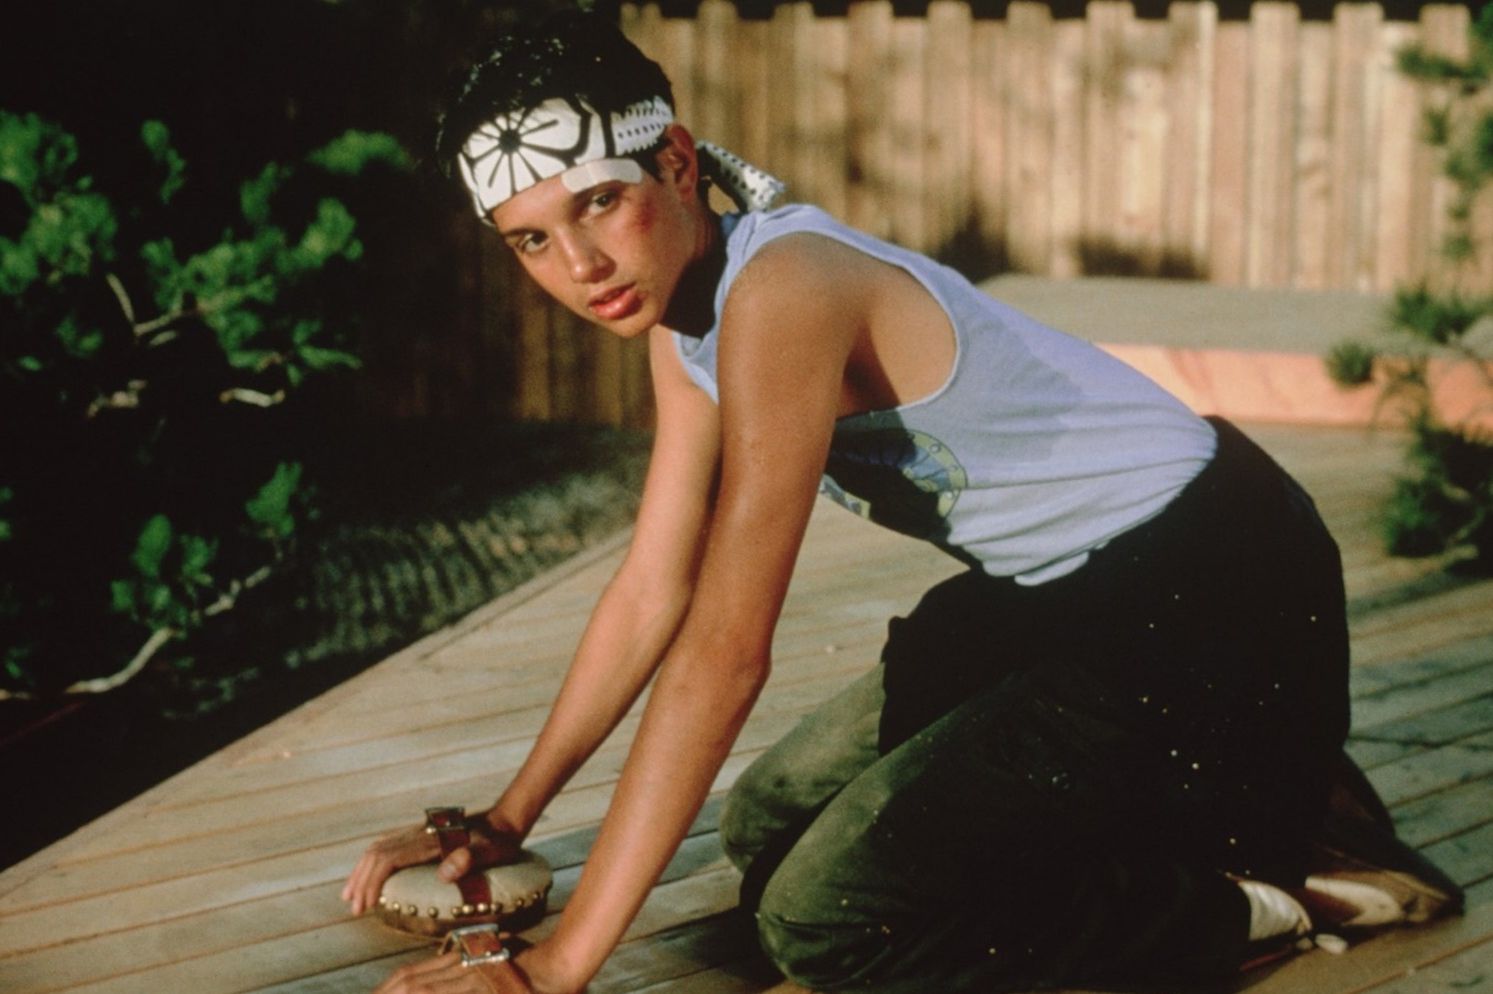 30 Facts About The Karate Kid Mental Floss